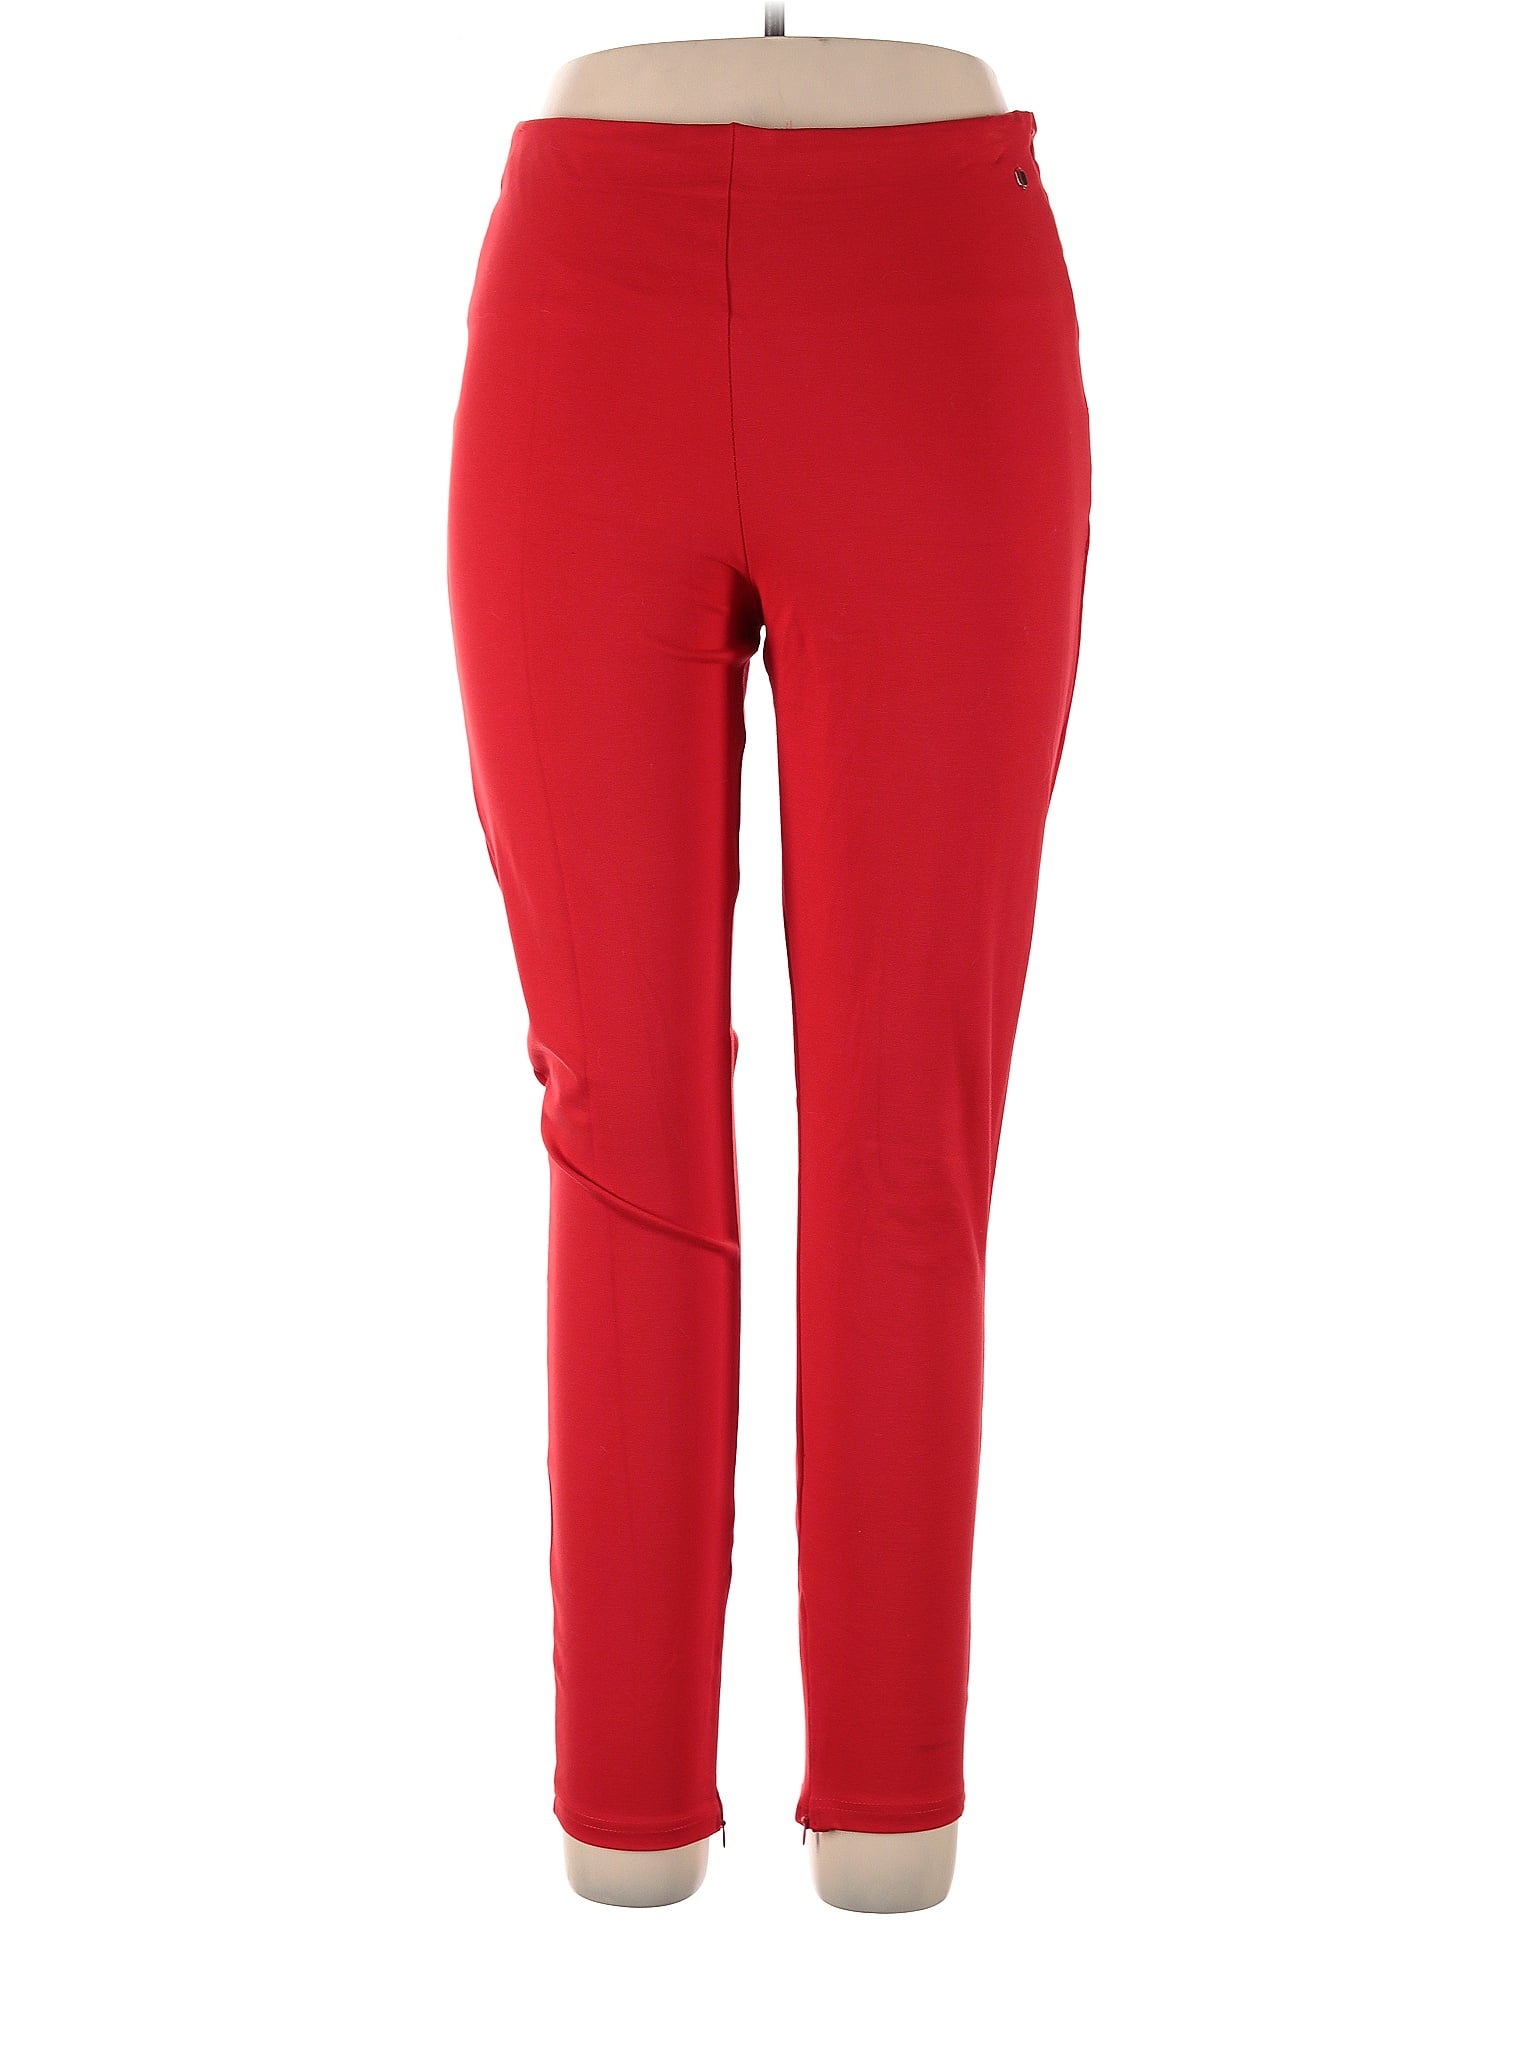 Fabletics Solid Red Jumpsuit Size XXL - 42% off